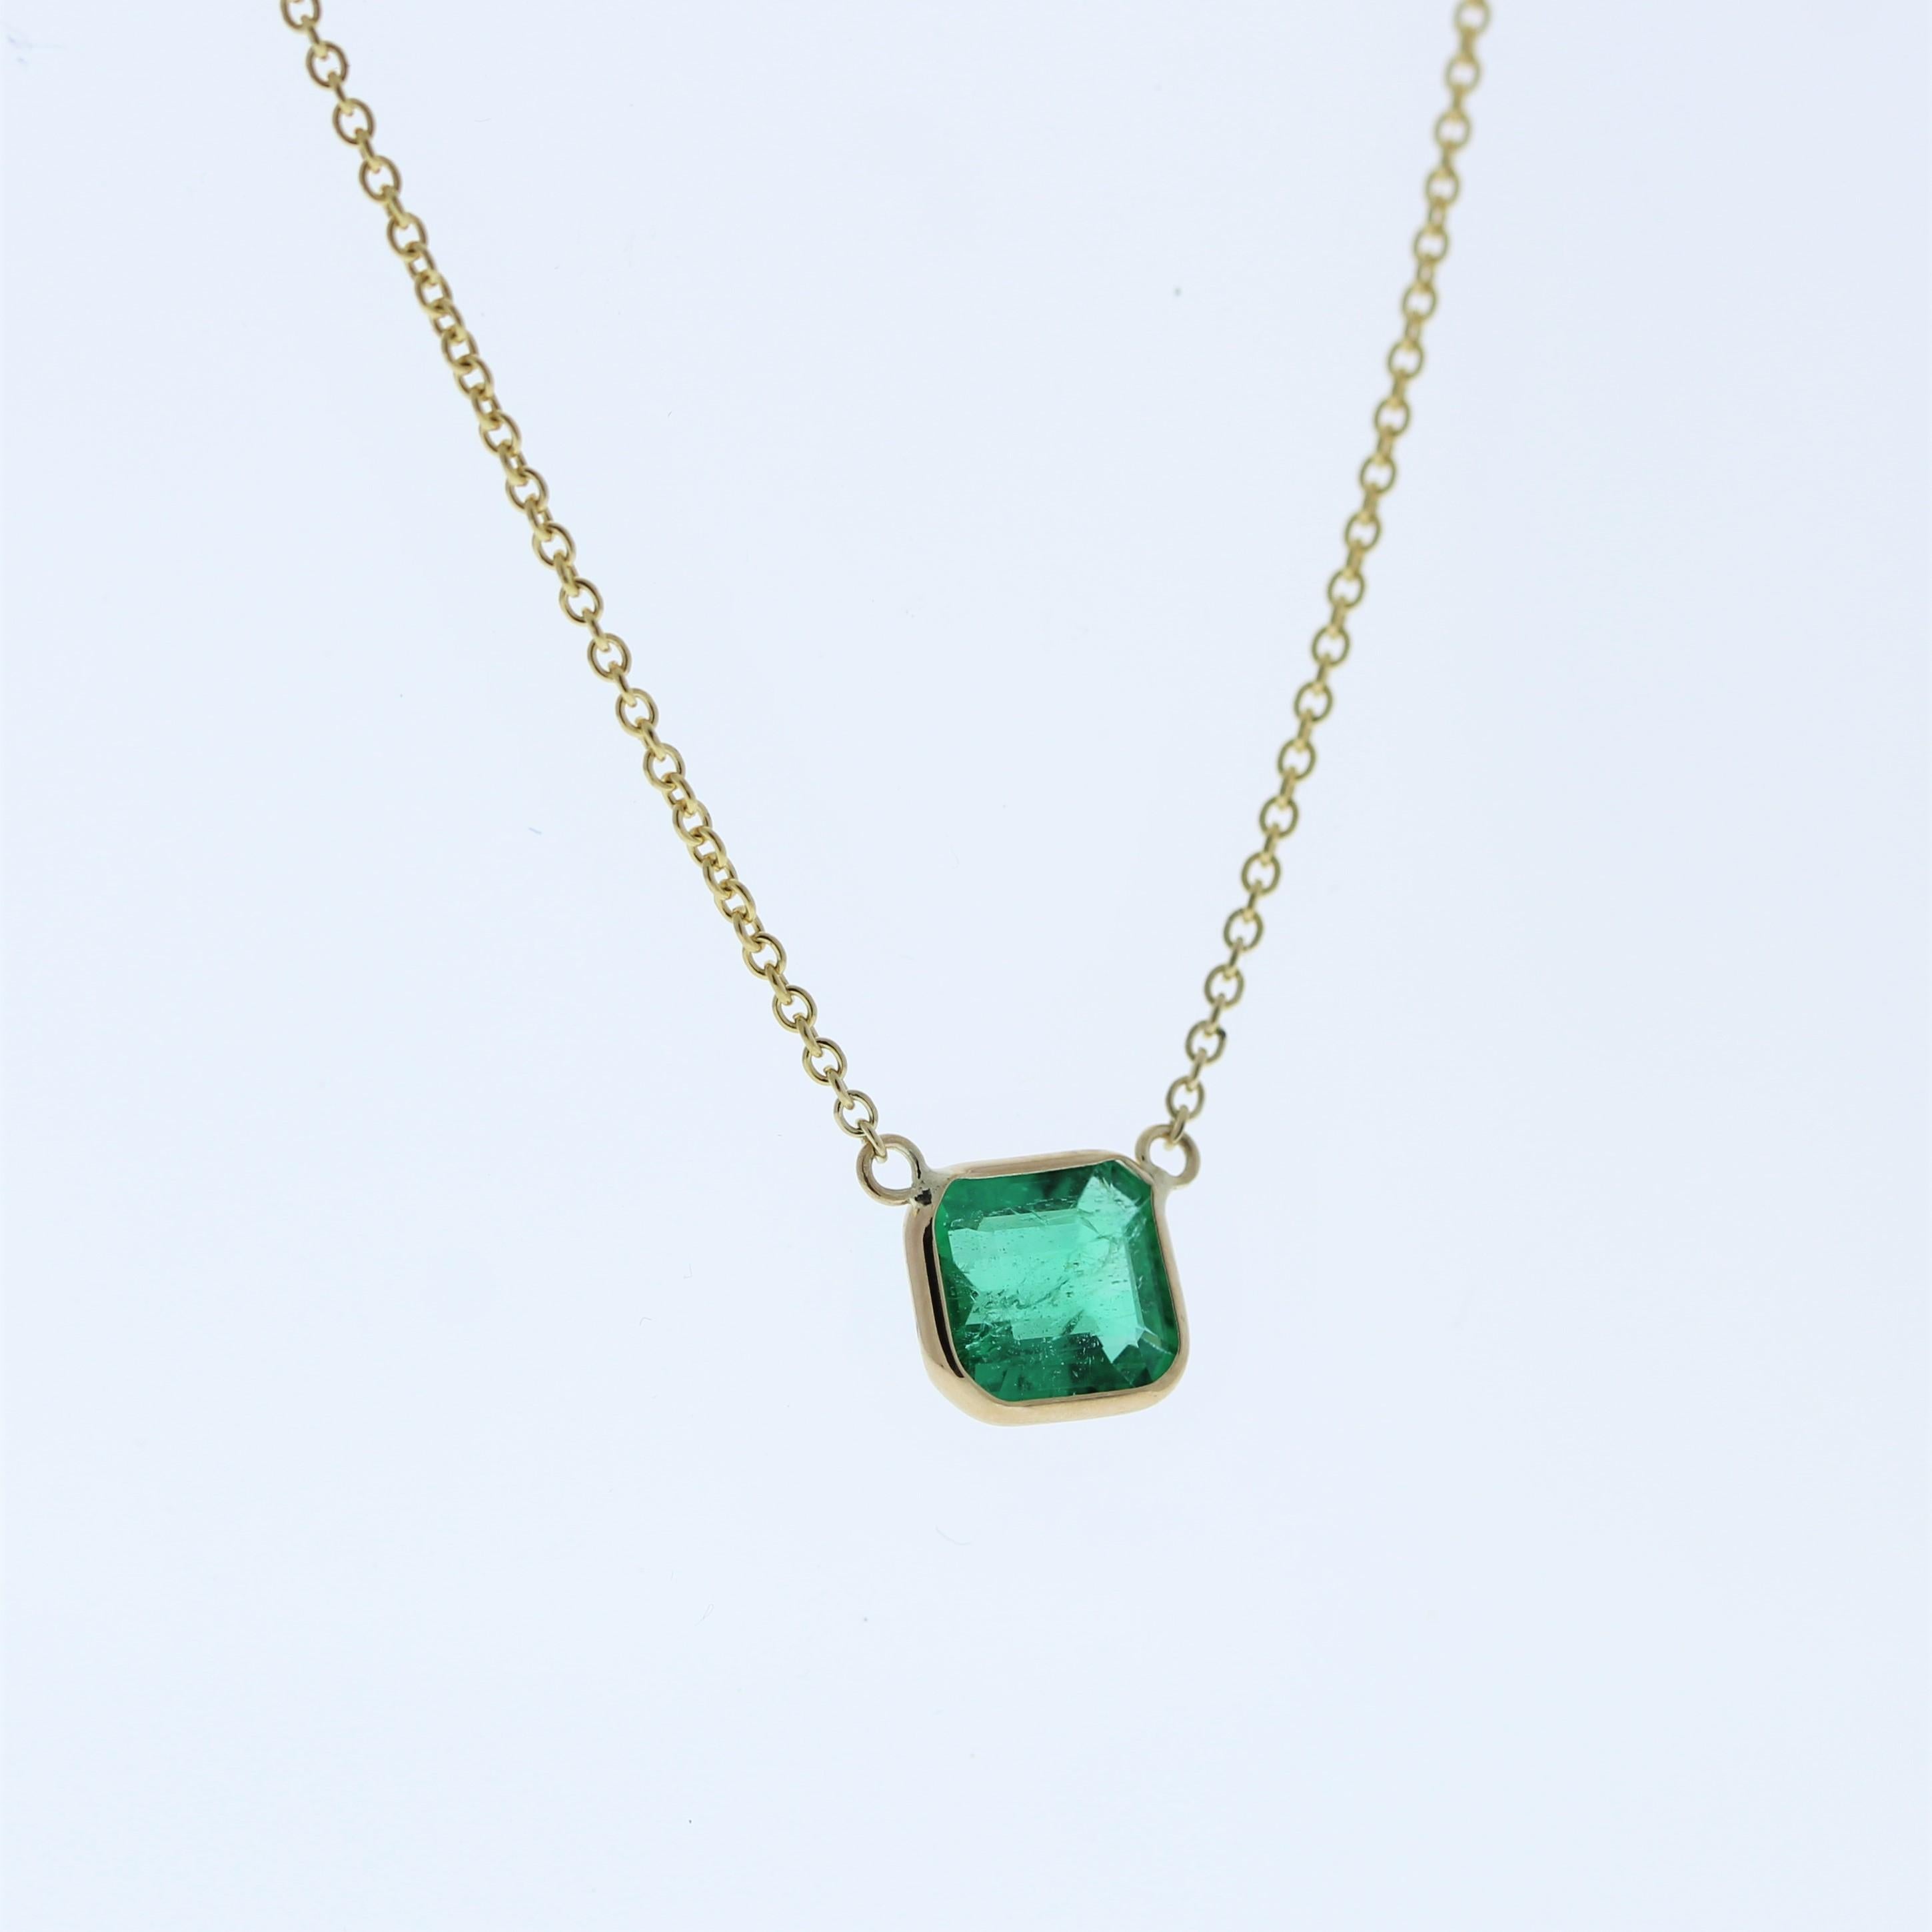 The necklace features a 1.40-carat Asscher-cut emerald set in a 14 karat yellow gold pendant or setting. The Asscher cut and the rich green color of the emerald against the yellow gold setting are likely to create an elegant and eye-catching fashion